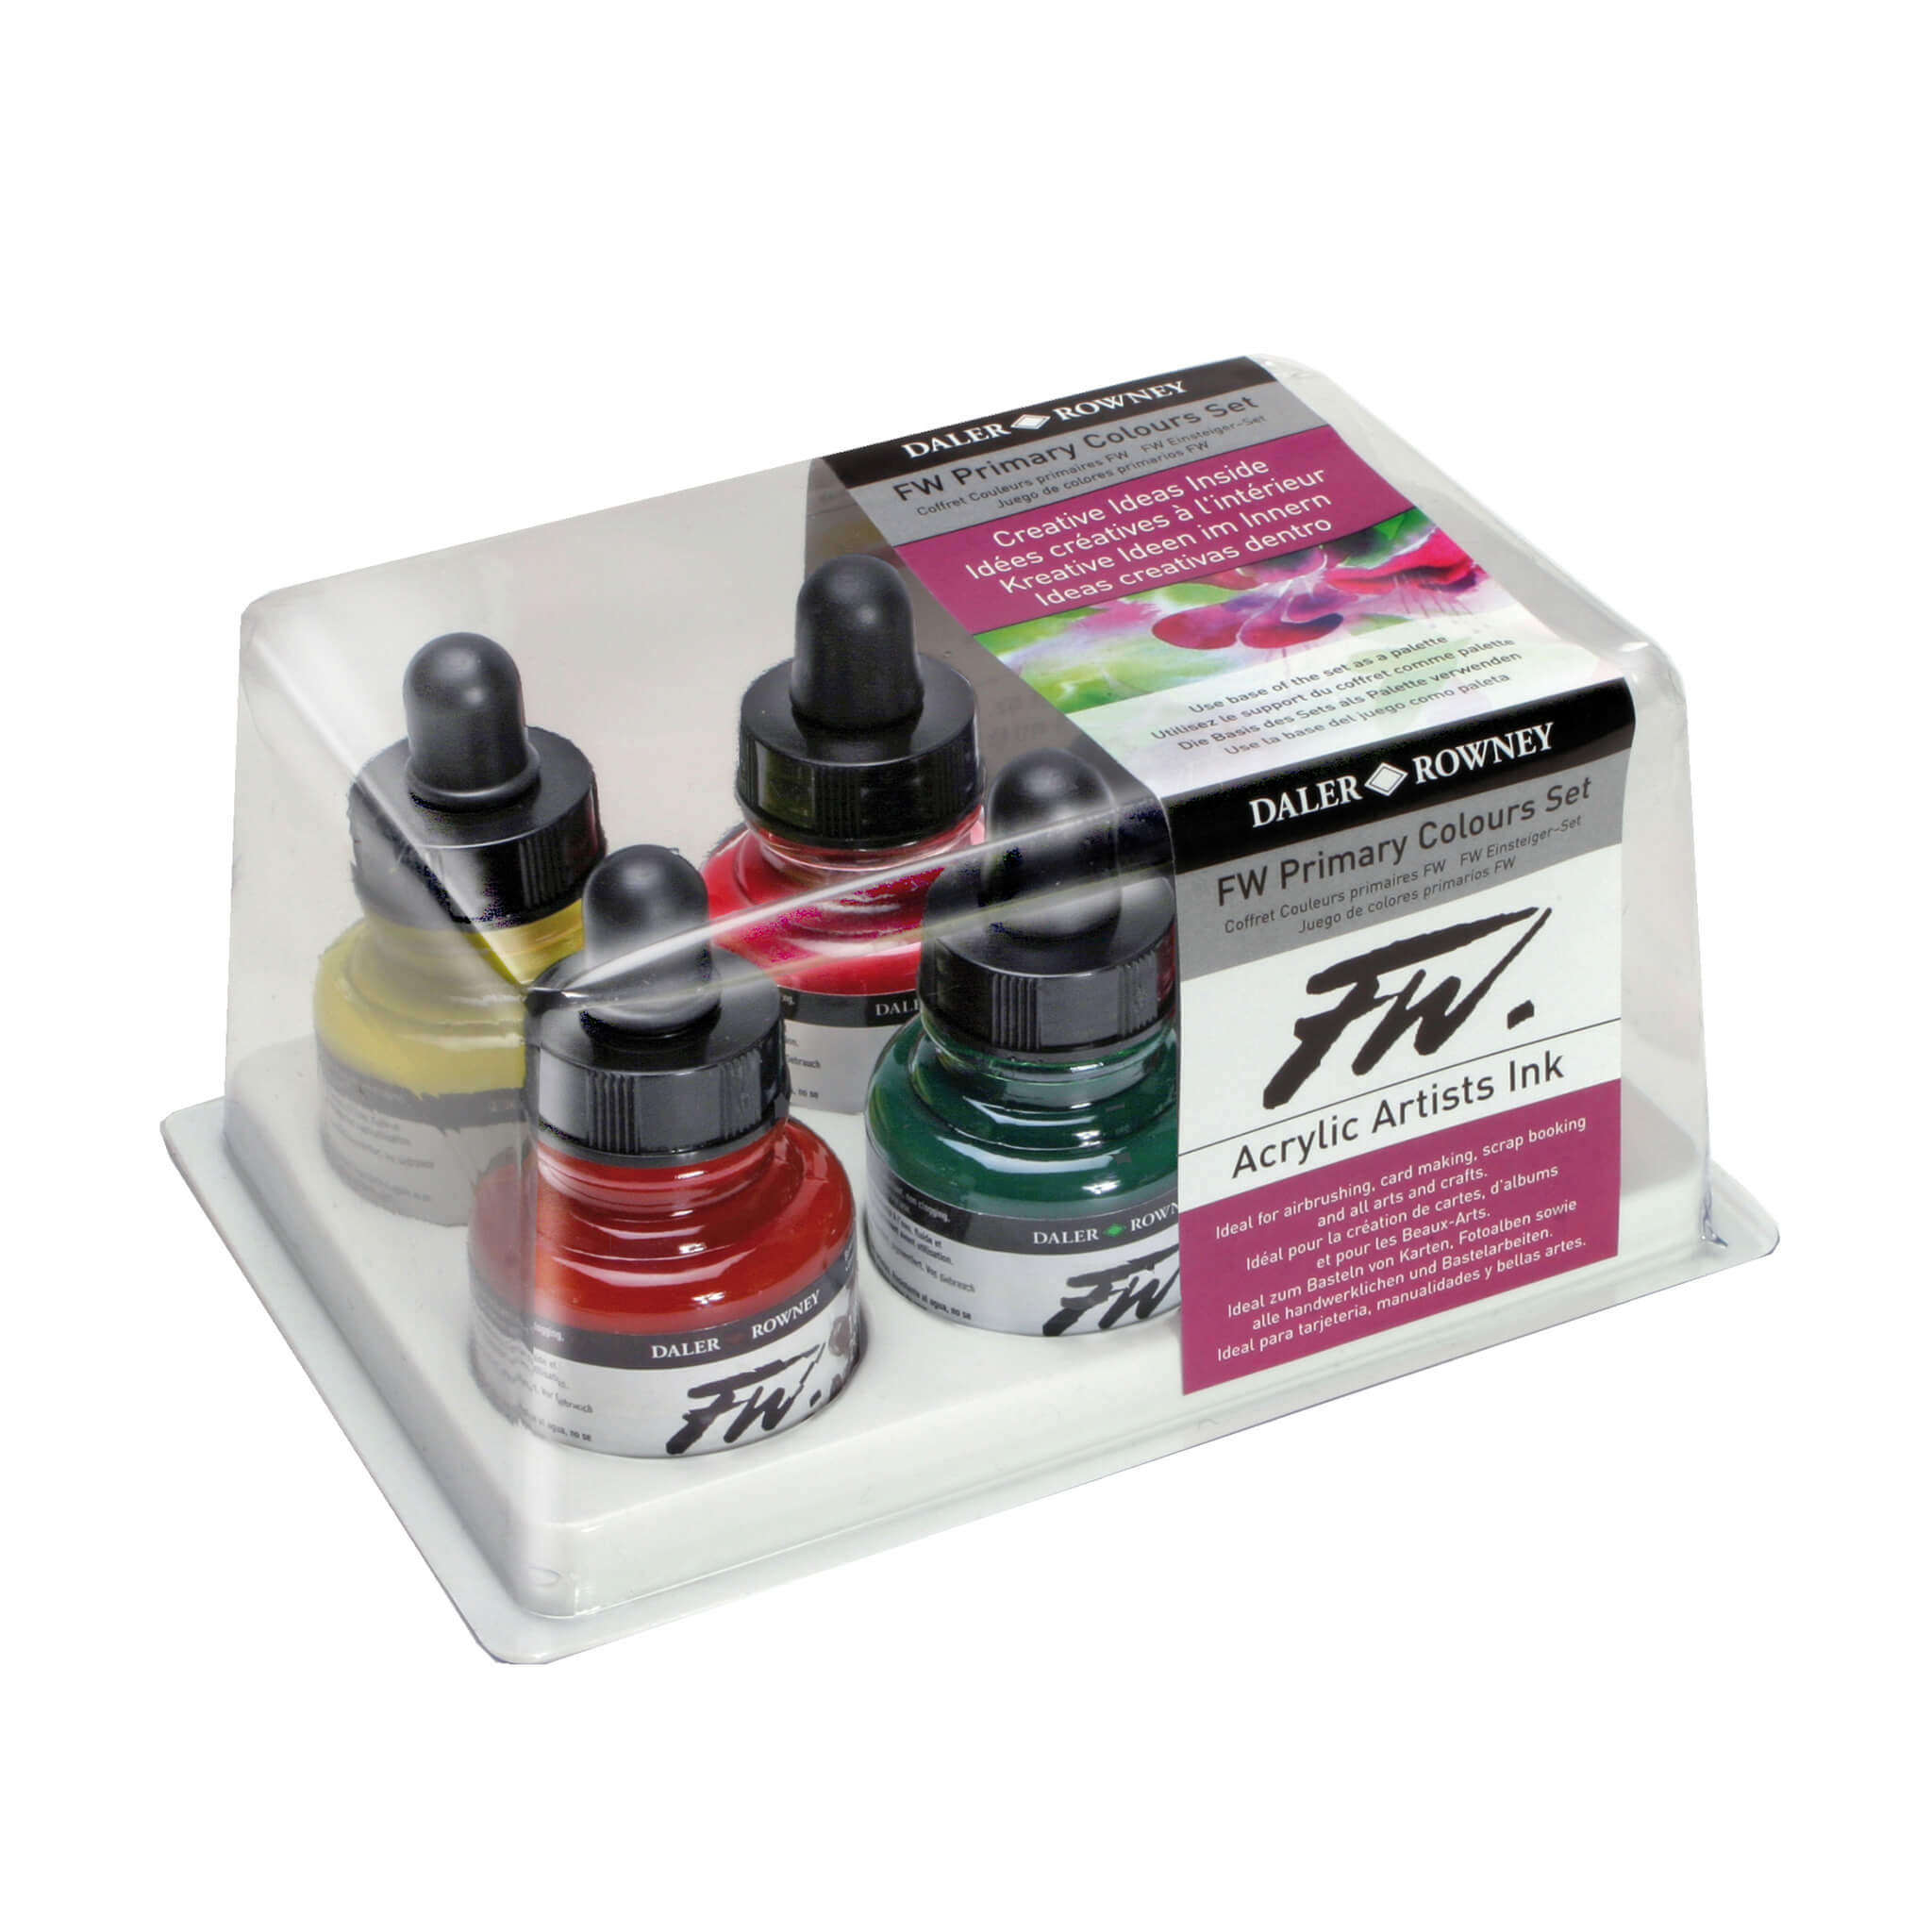 Daler Rowney Artists FW Acrylic Ink Neon Colour Set 6 x 29.5ml with Marker